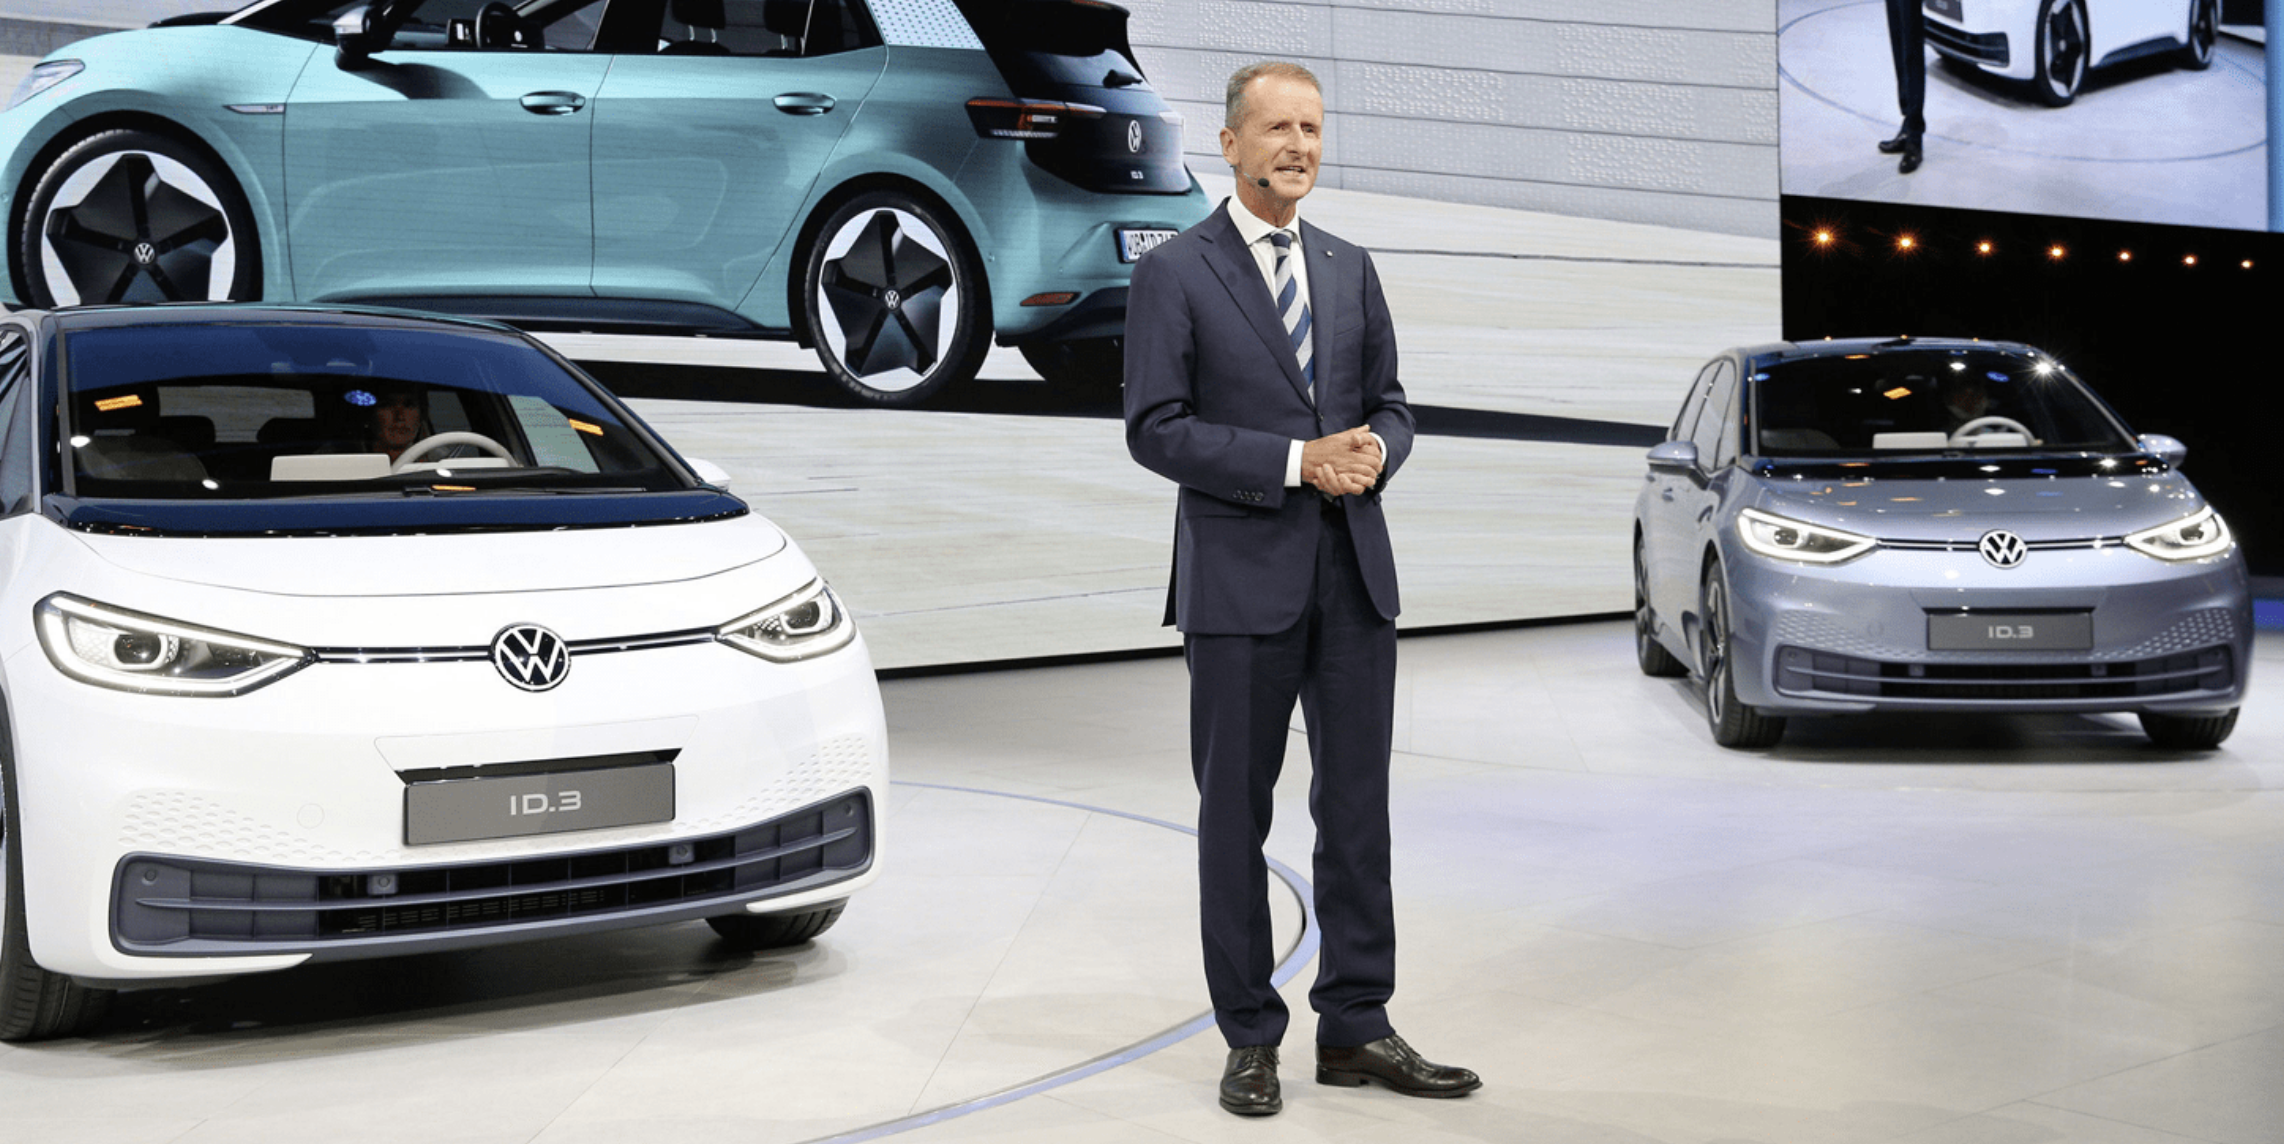 VW, fairing well financially, extends contract of CEO Diess